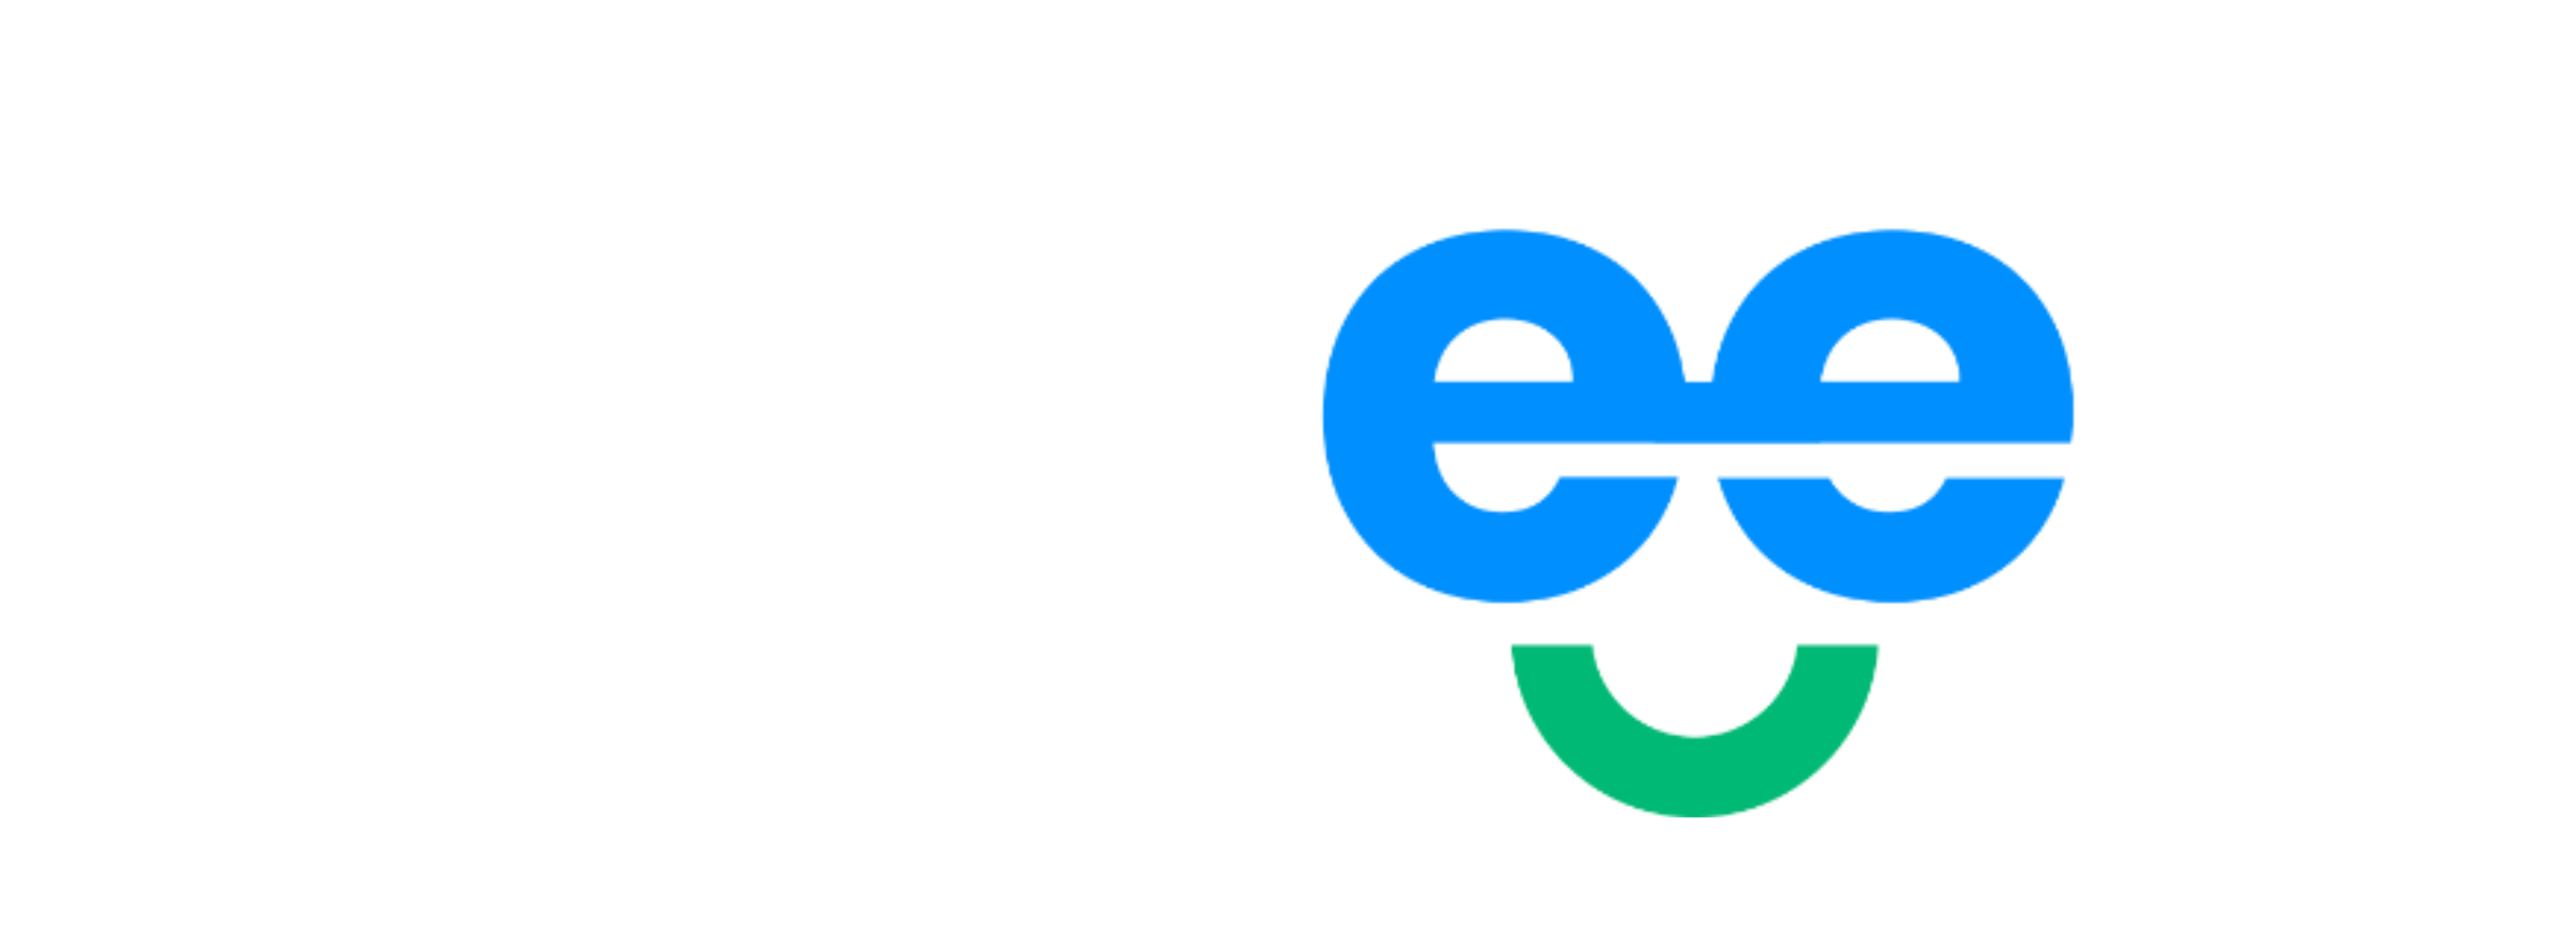 The logo of artleey, featuring the word "artleey" in white with a blue smile-like underline on a green background. OCIDM,io Branding and Digital marketing Hamilton, Toronto, Oakville, Mississauga